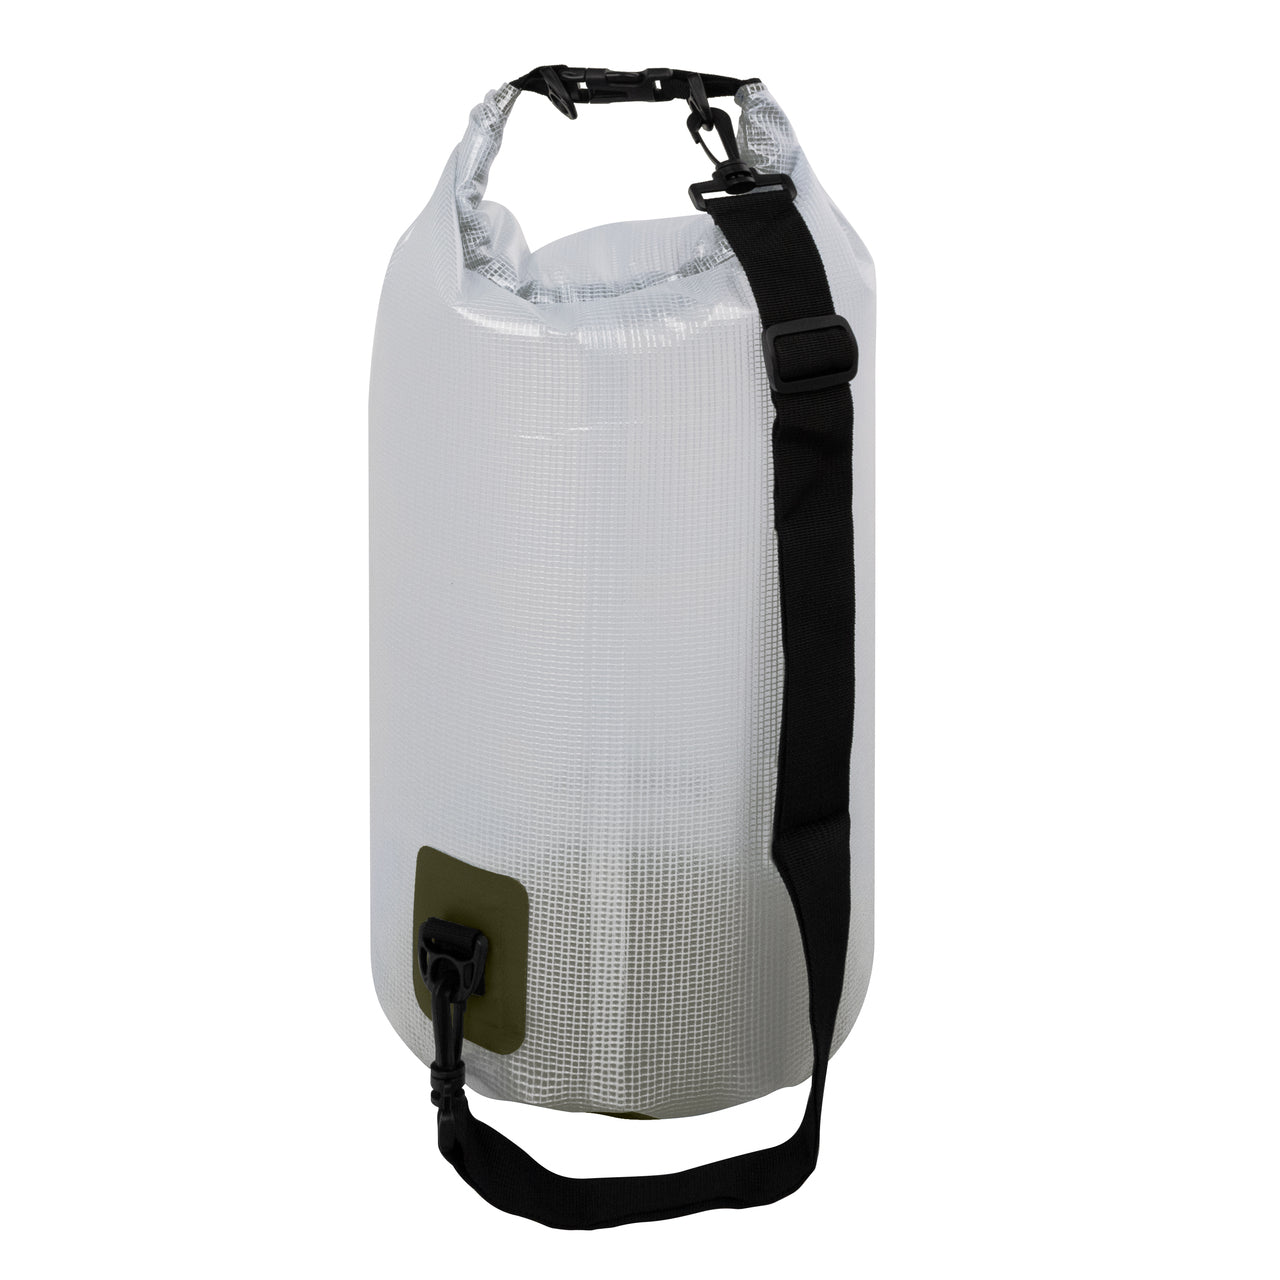 TrailGear 20 liter Heavy-Duty Transparent Dry Bag in the olive variation.